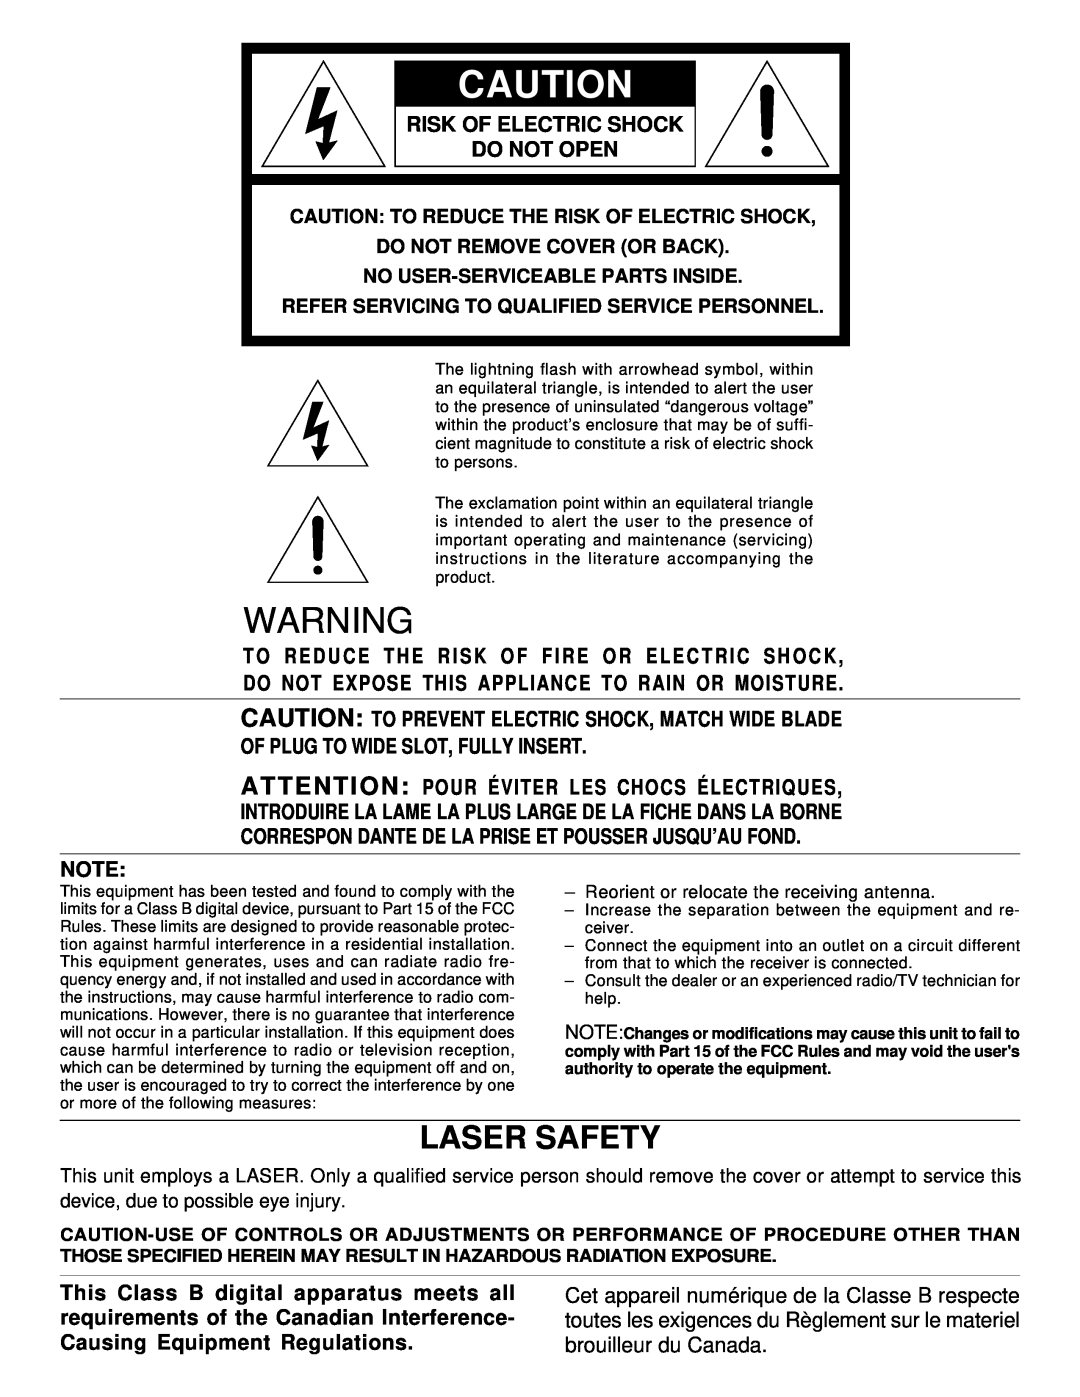 Denon PMD330, PMD331, PMD340 manual Laser Safety, Risk Of Electric Shock Do Not Open 